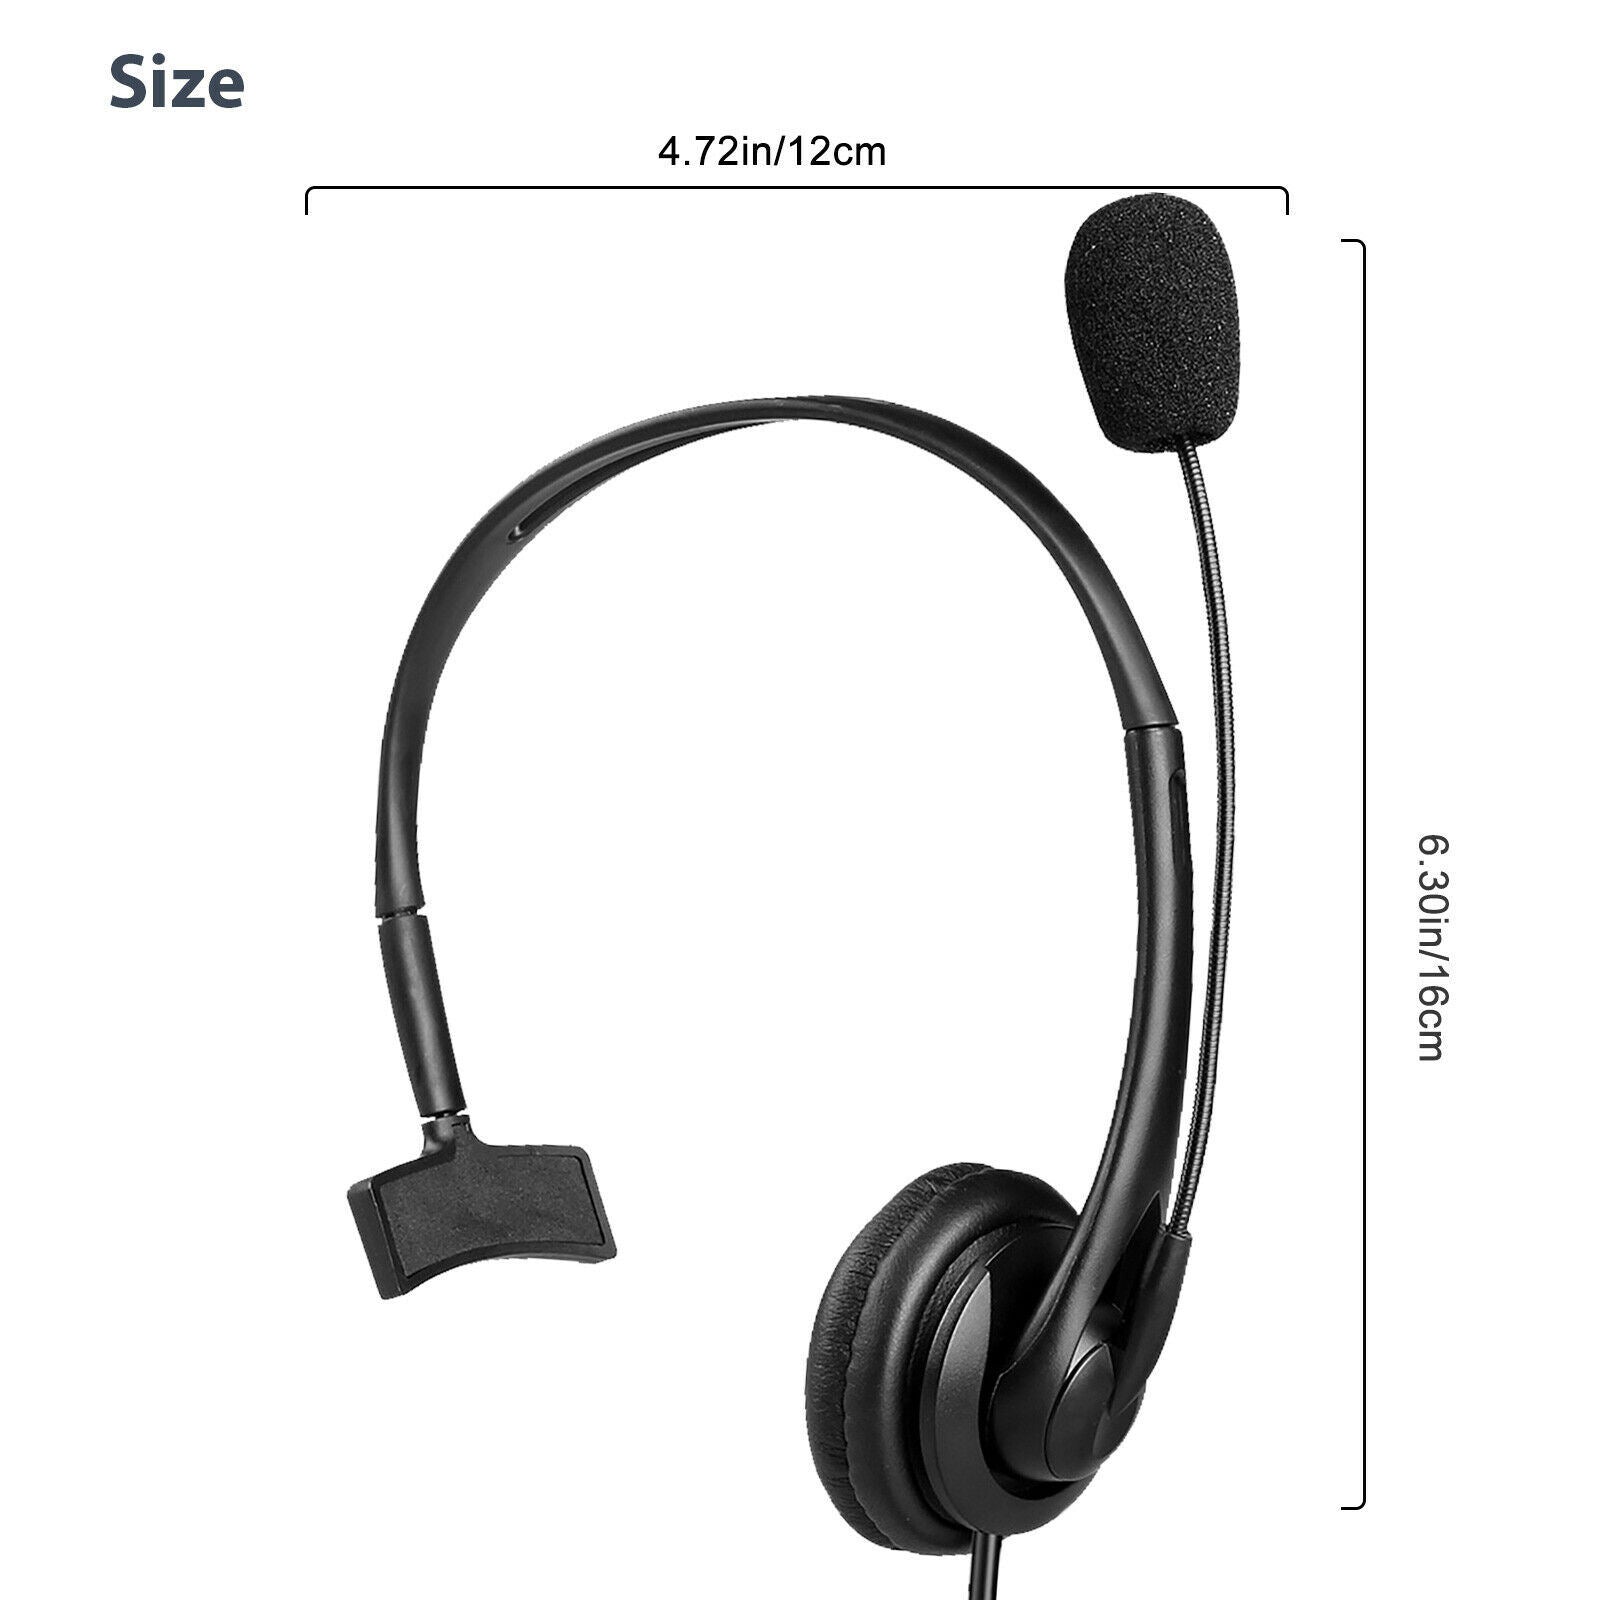 Microphone headset for laptop pc call center computer chat usb noise